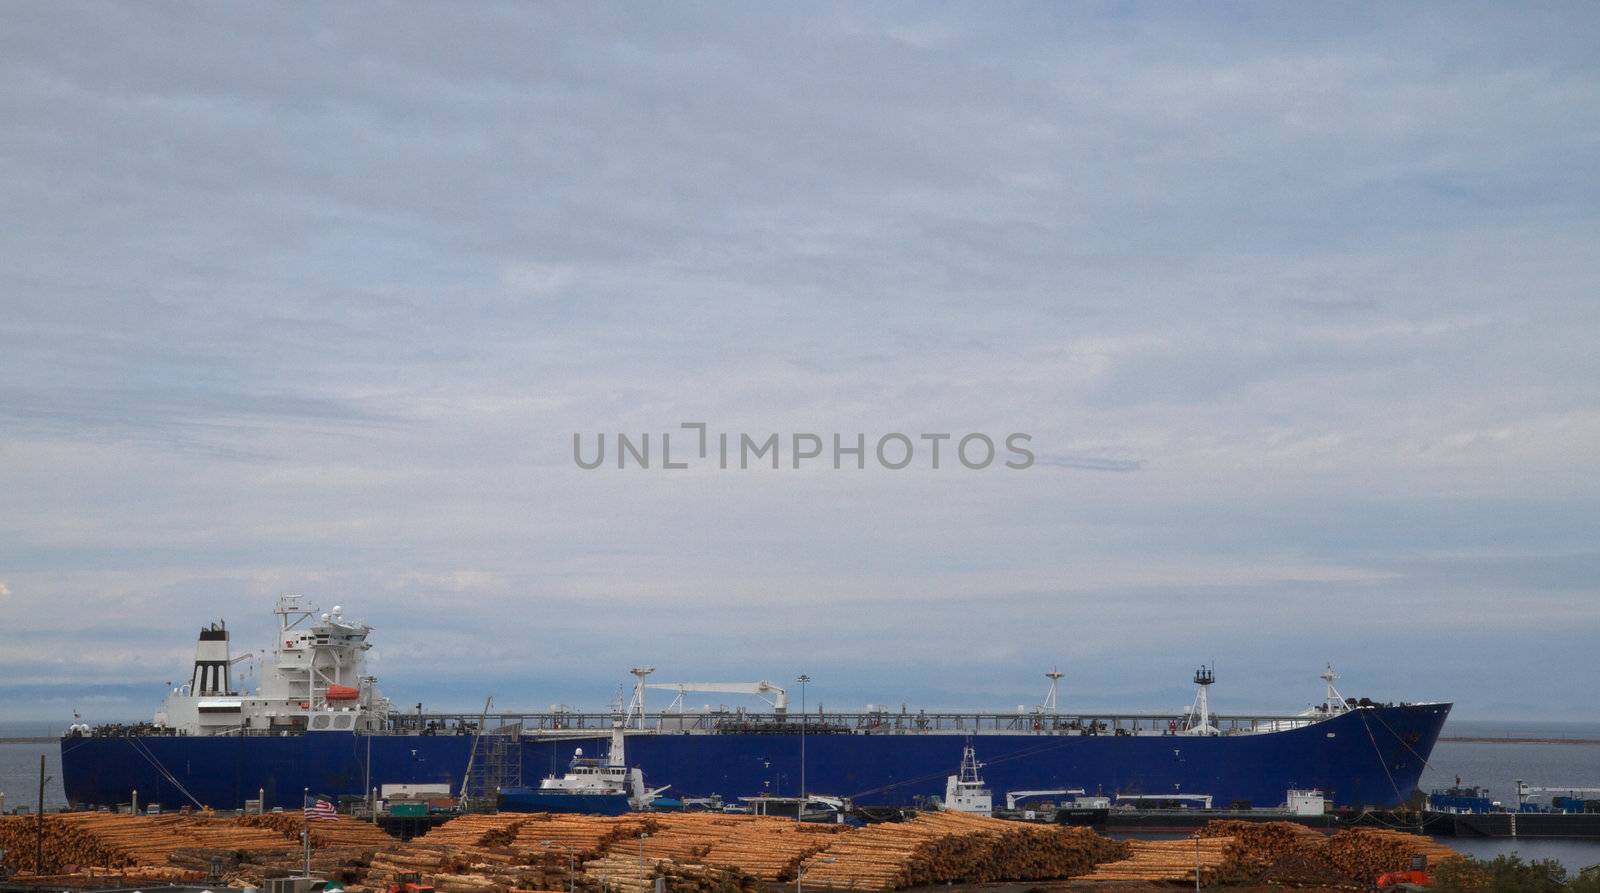 Large blue freighter ship having lumber loaded with a cloudy sky